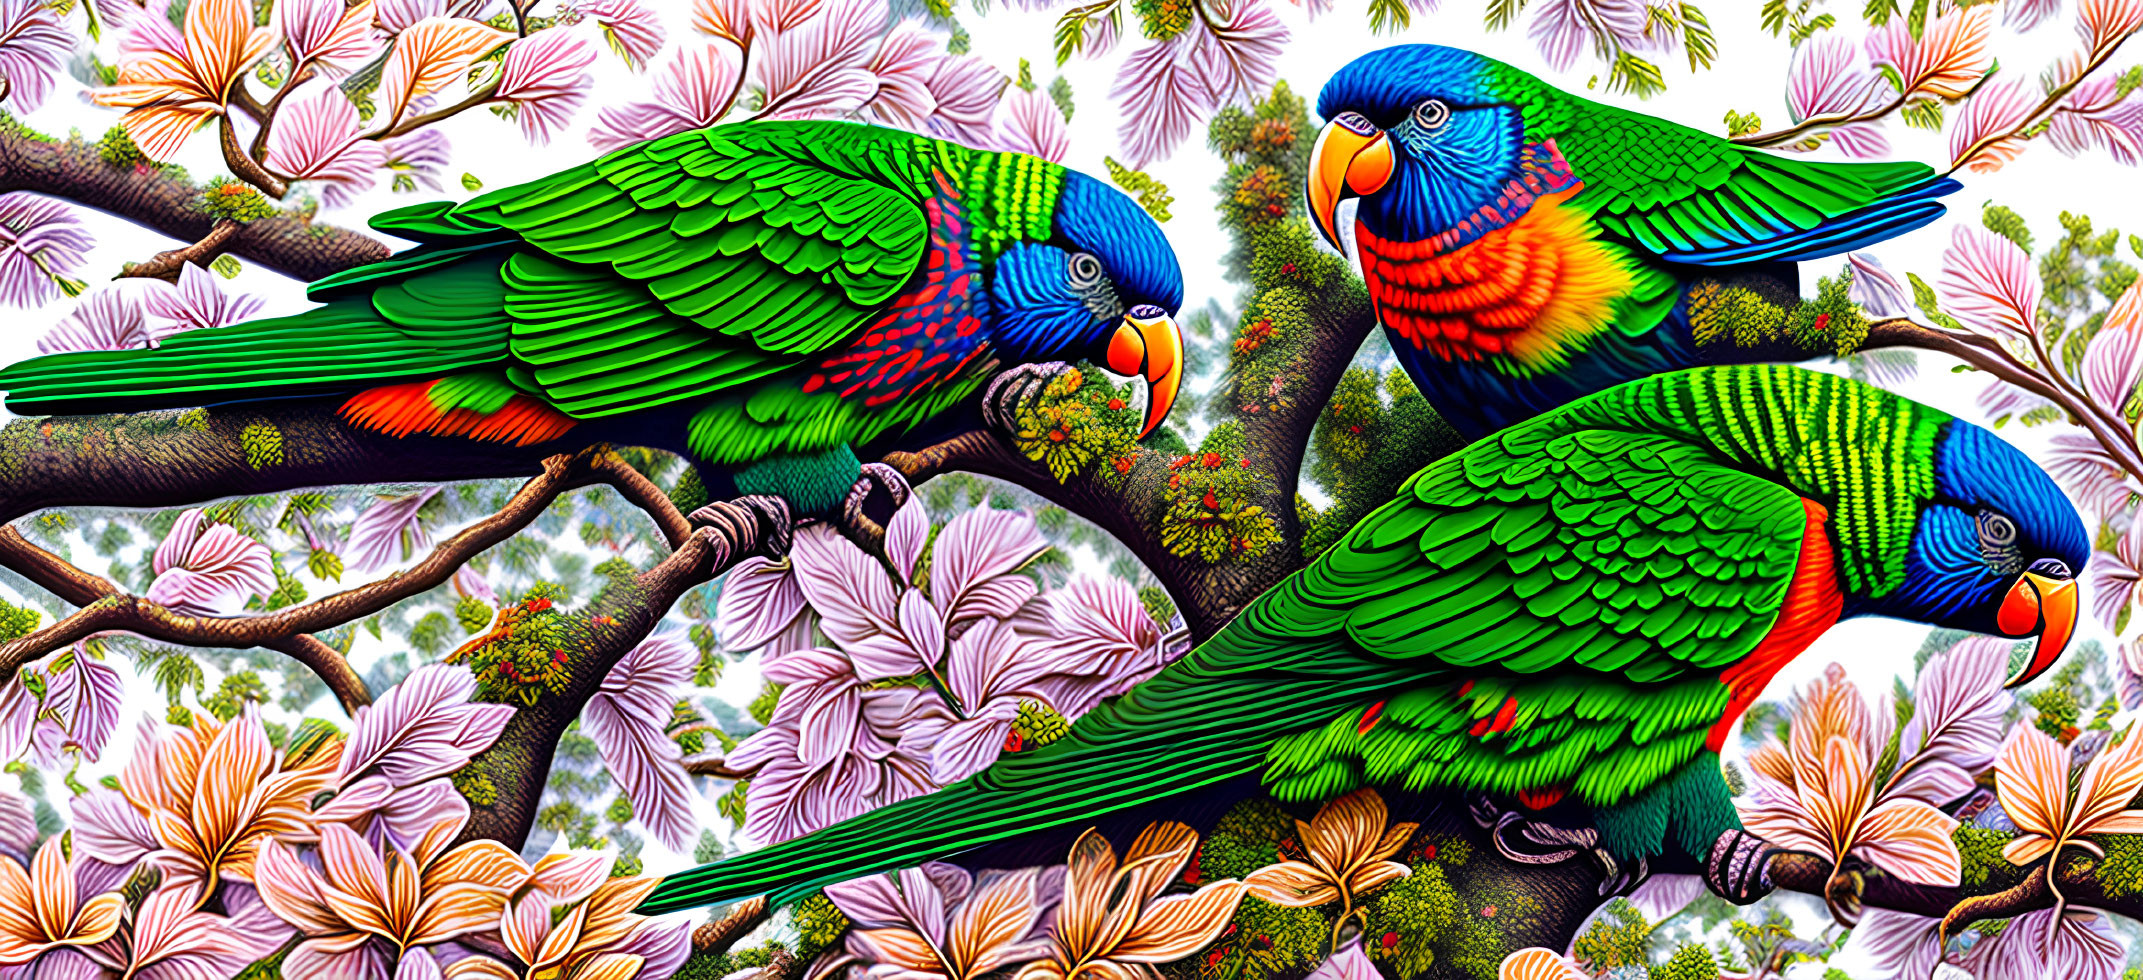 Colorful Parrots Perched on Branches in Vibrant Illustration